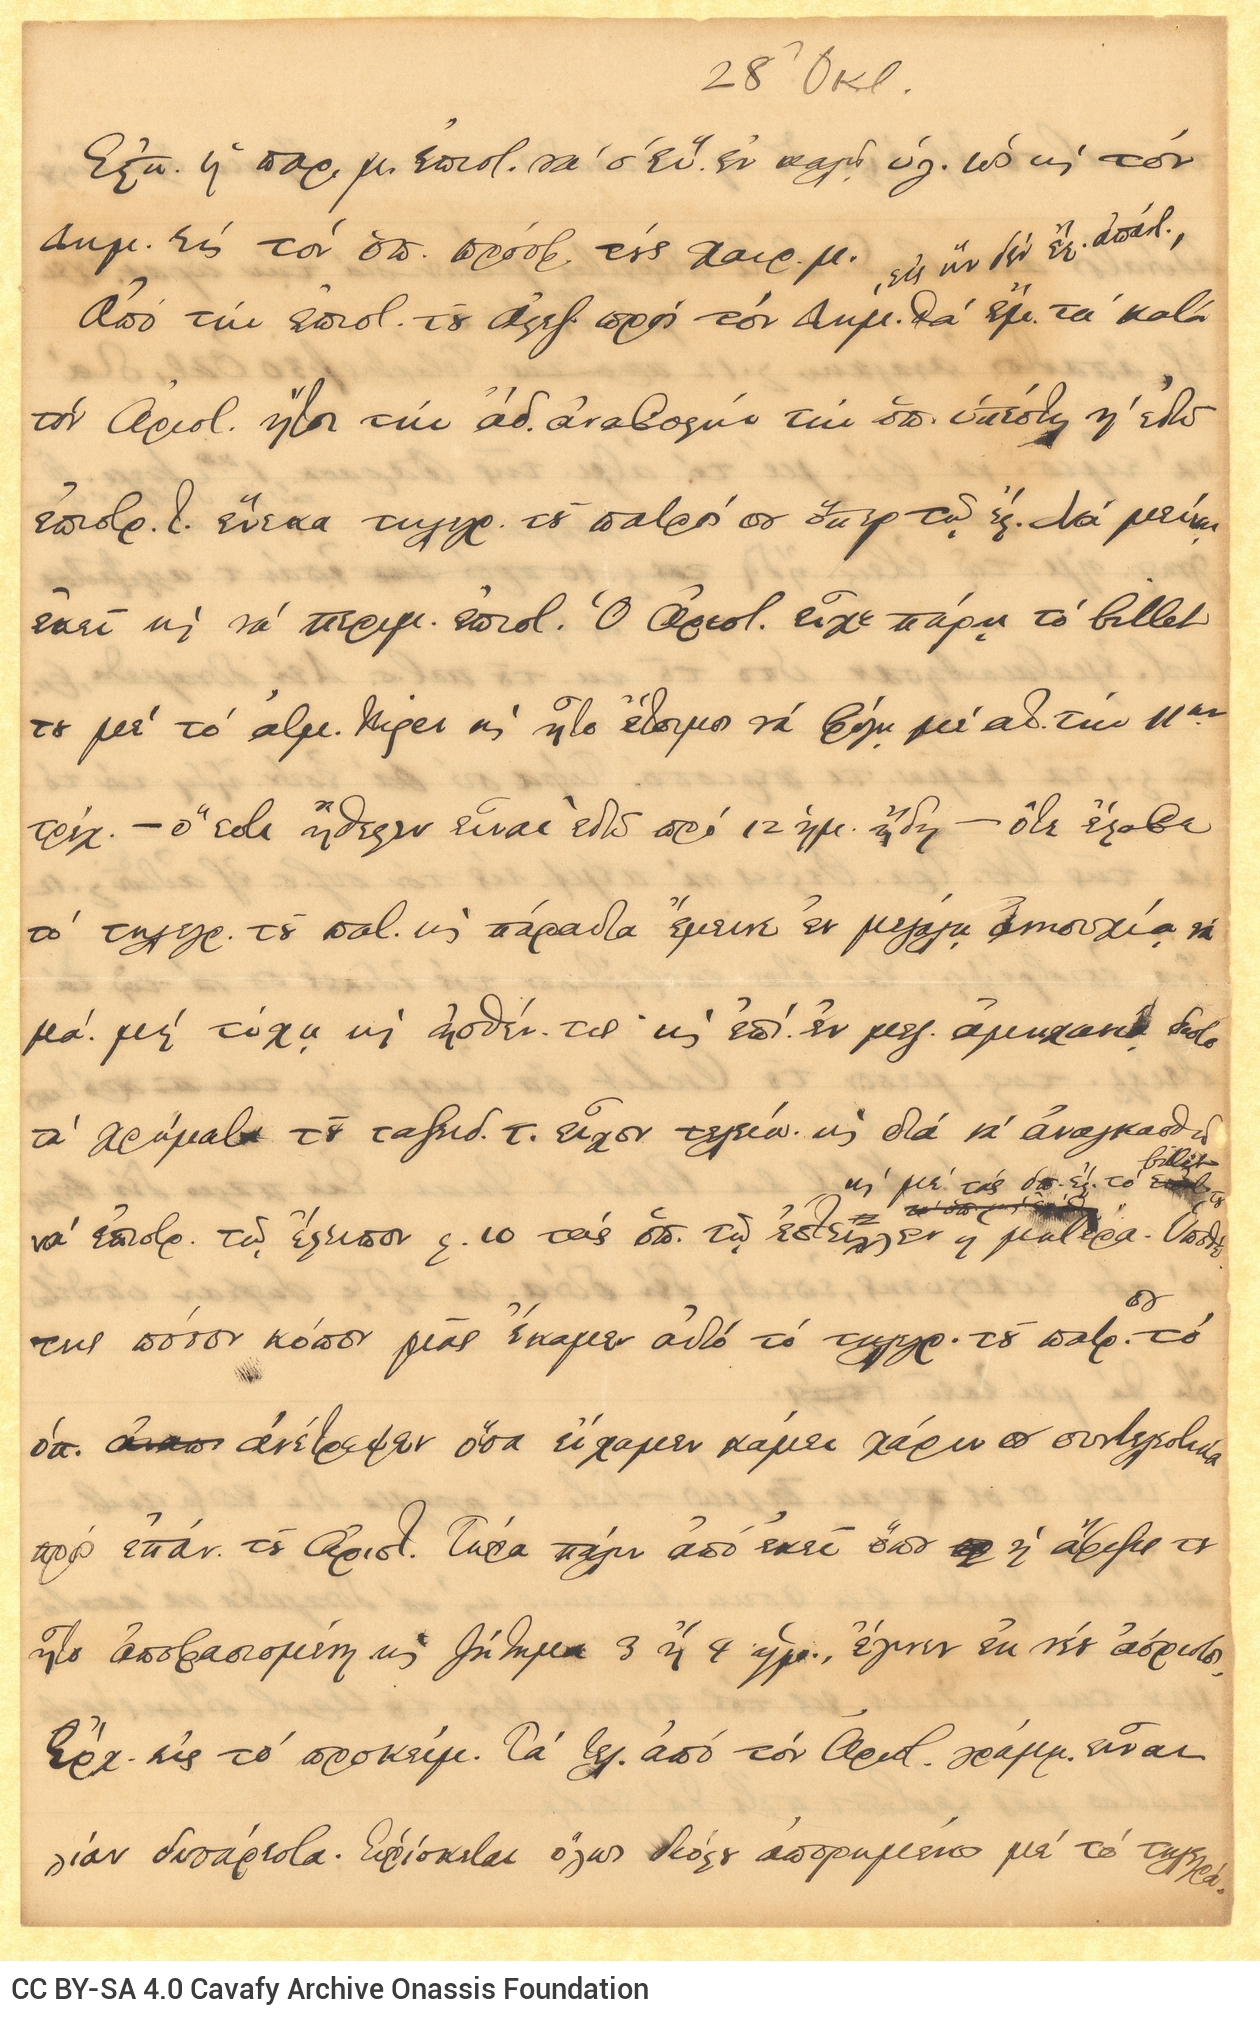 Handwritten draft letter by C. P. Cavafy to Maria Vourou, wife of Aristeidis Cavafy, dated 28 October, from the 1889 correspo